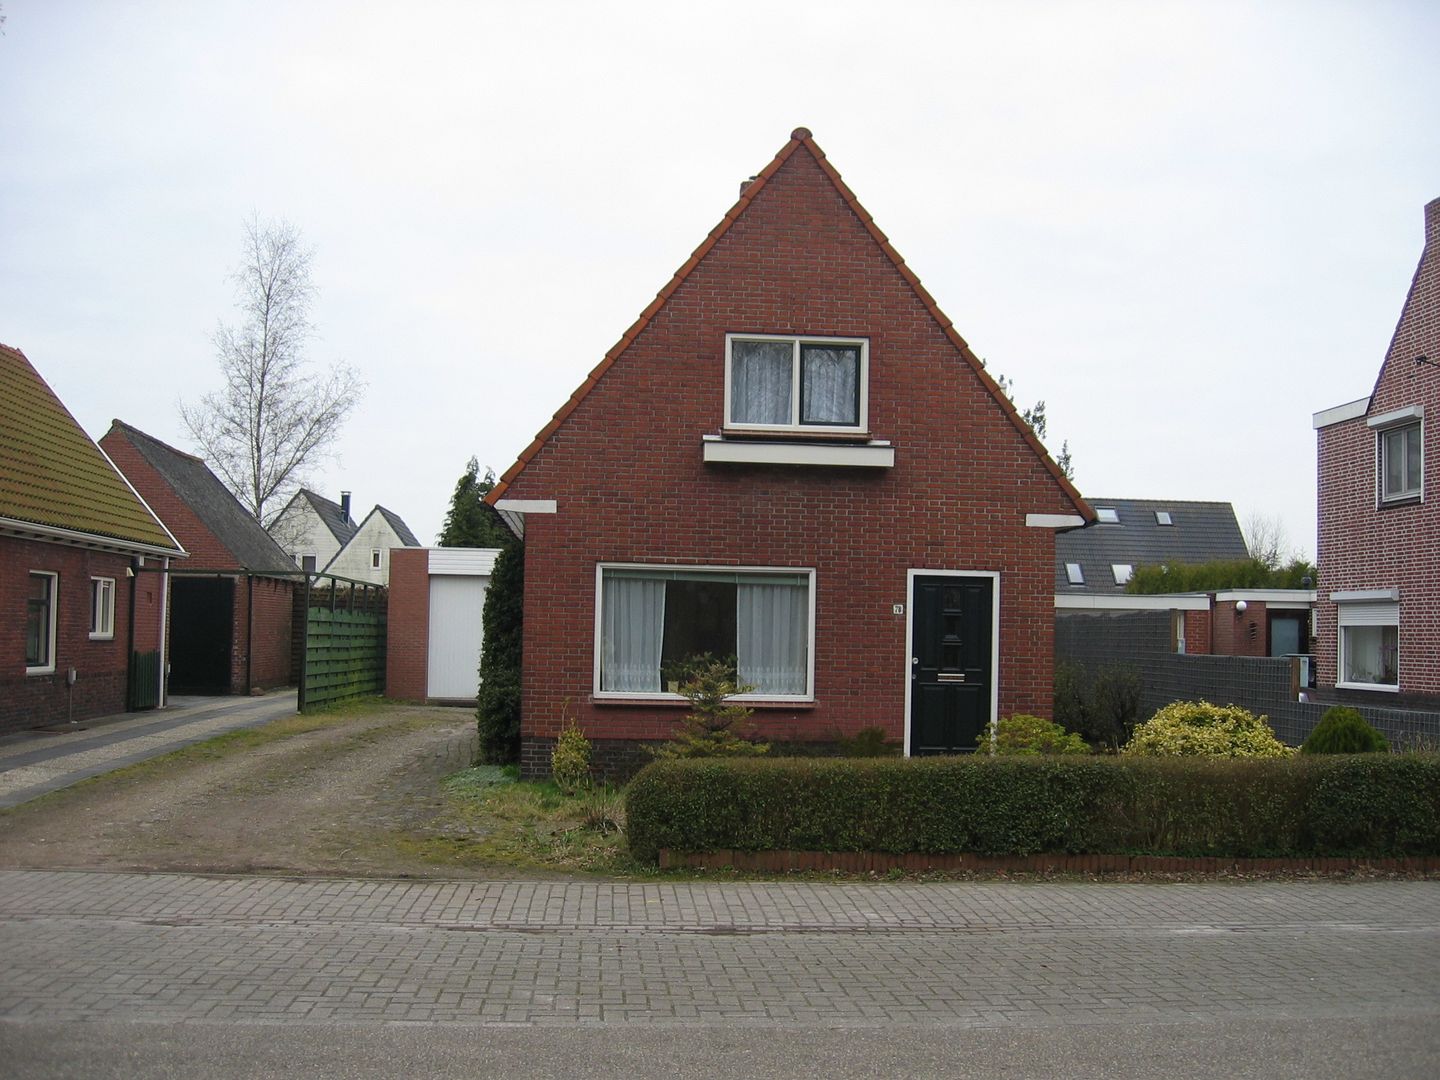 Oude situatie. TTAB (Tjade Timmer Architect & Bouwadvies)